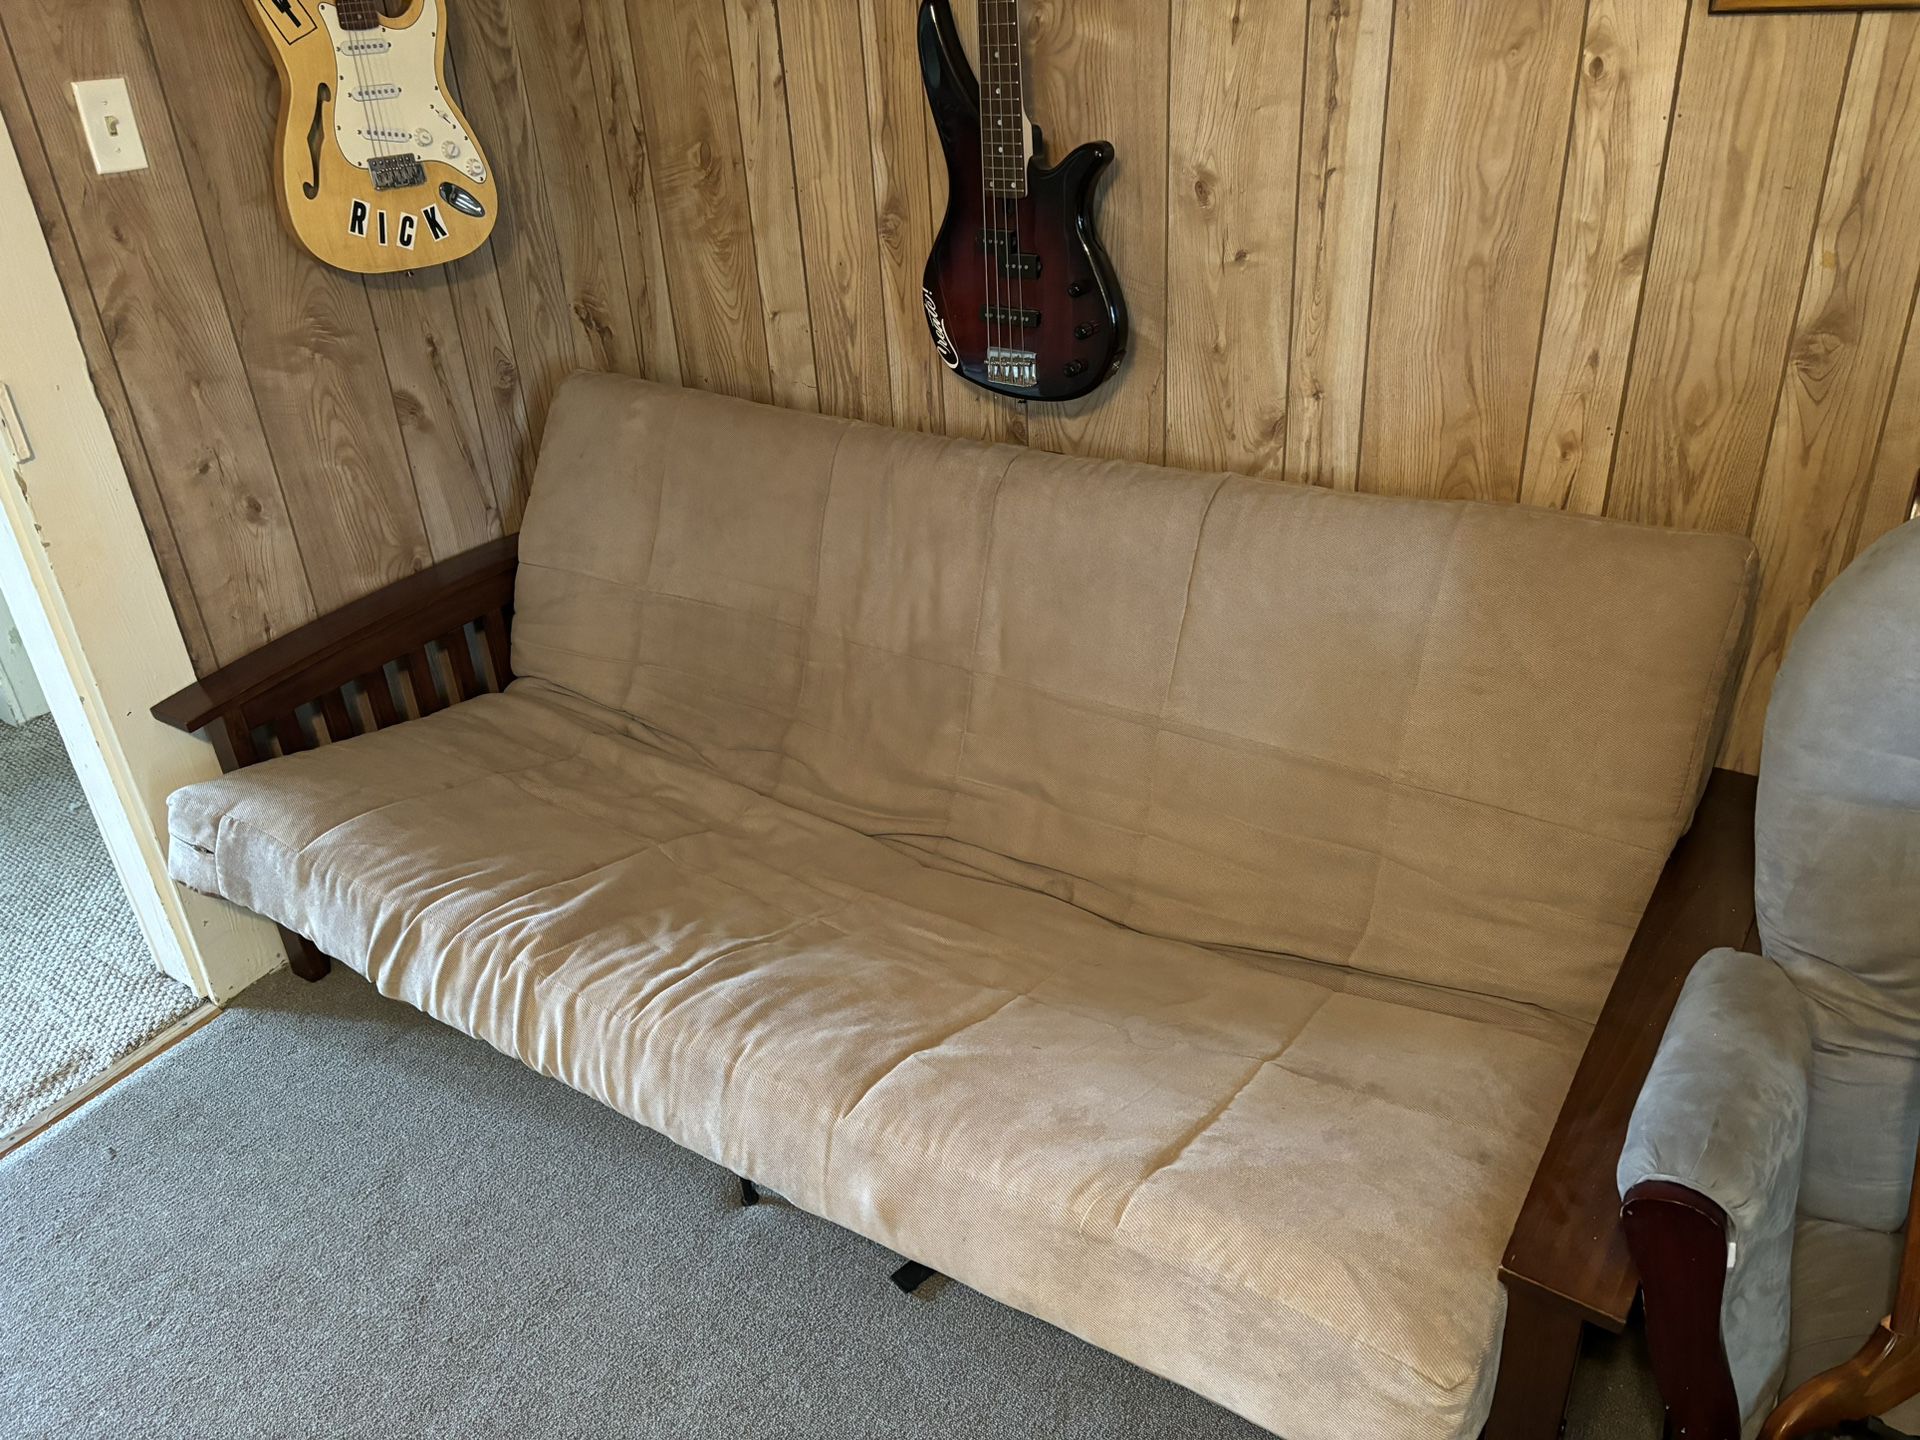 Futon For Sale Nothing Wrong With It At All Pick Up Only 